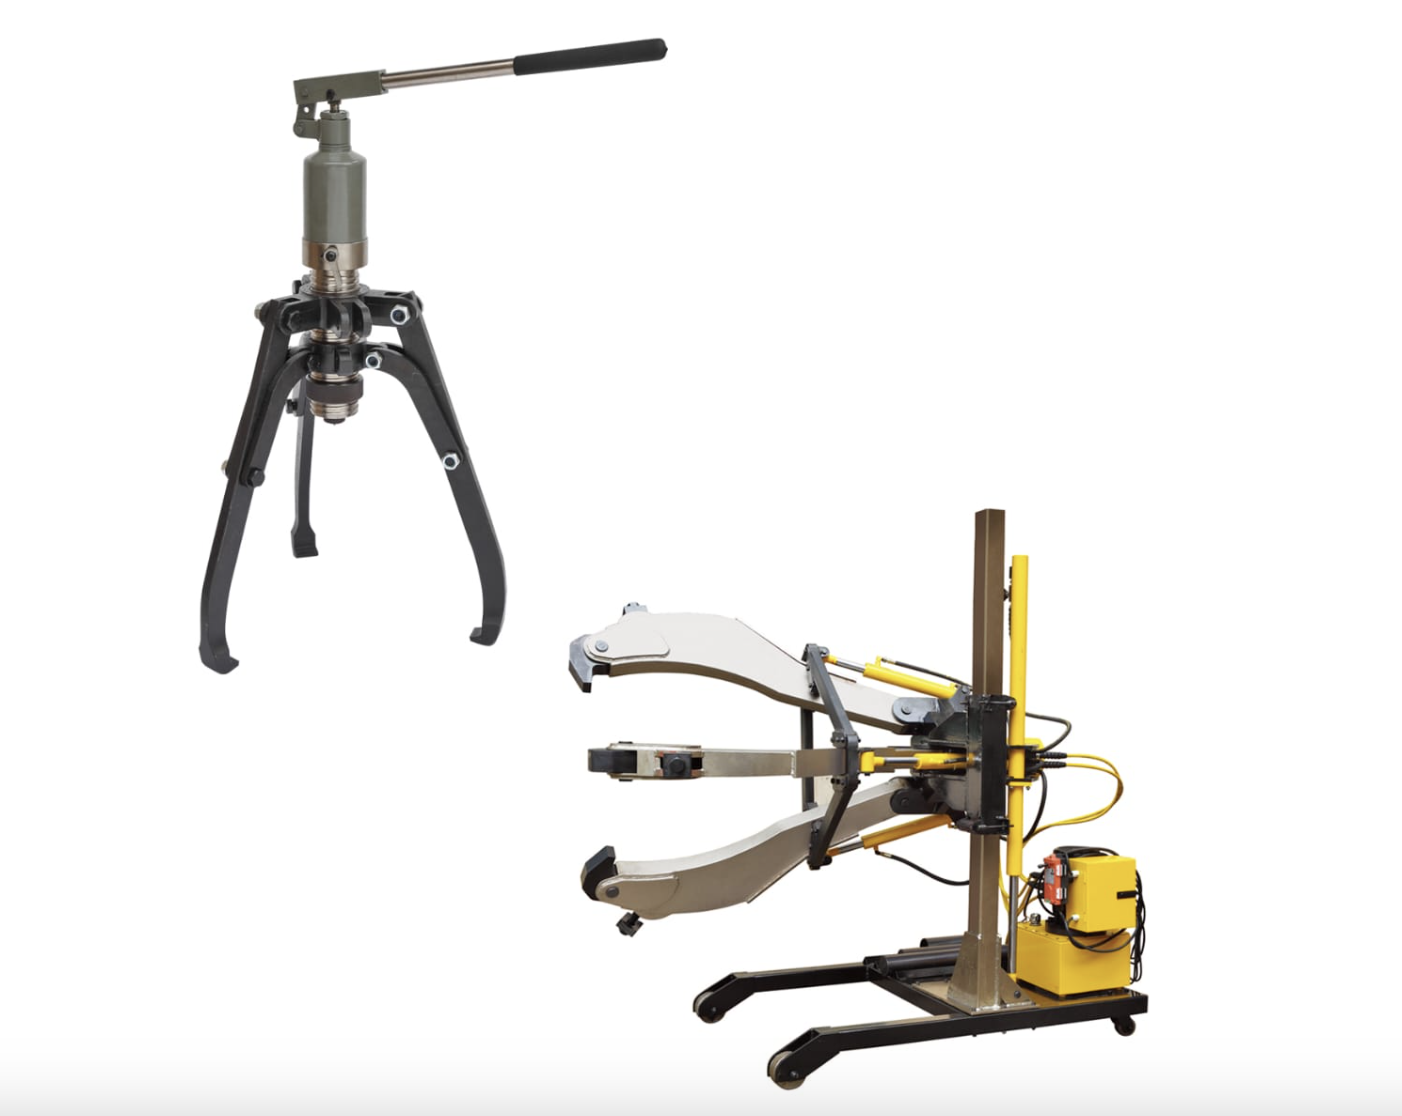 What is a Hydraulic Puller?